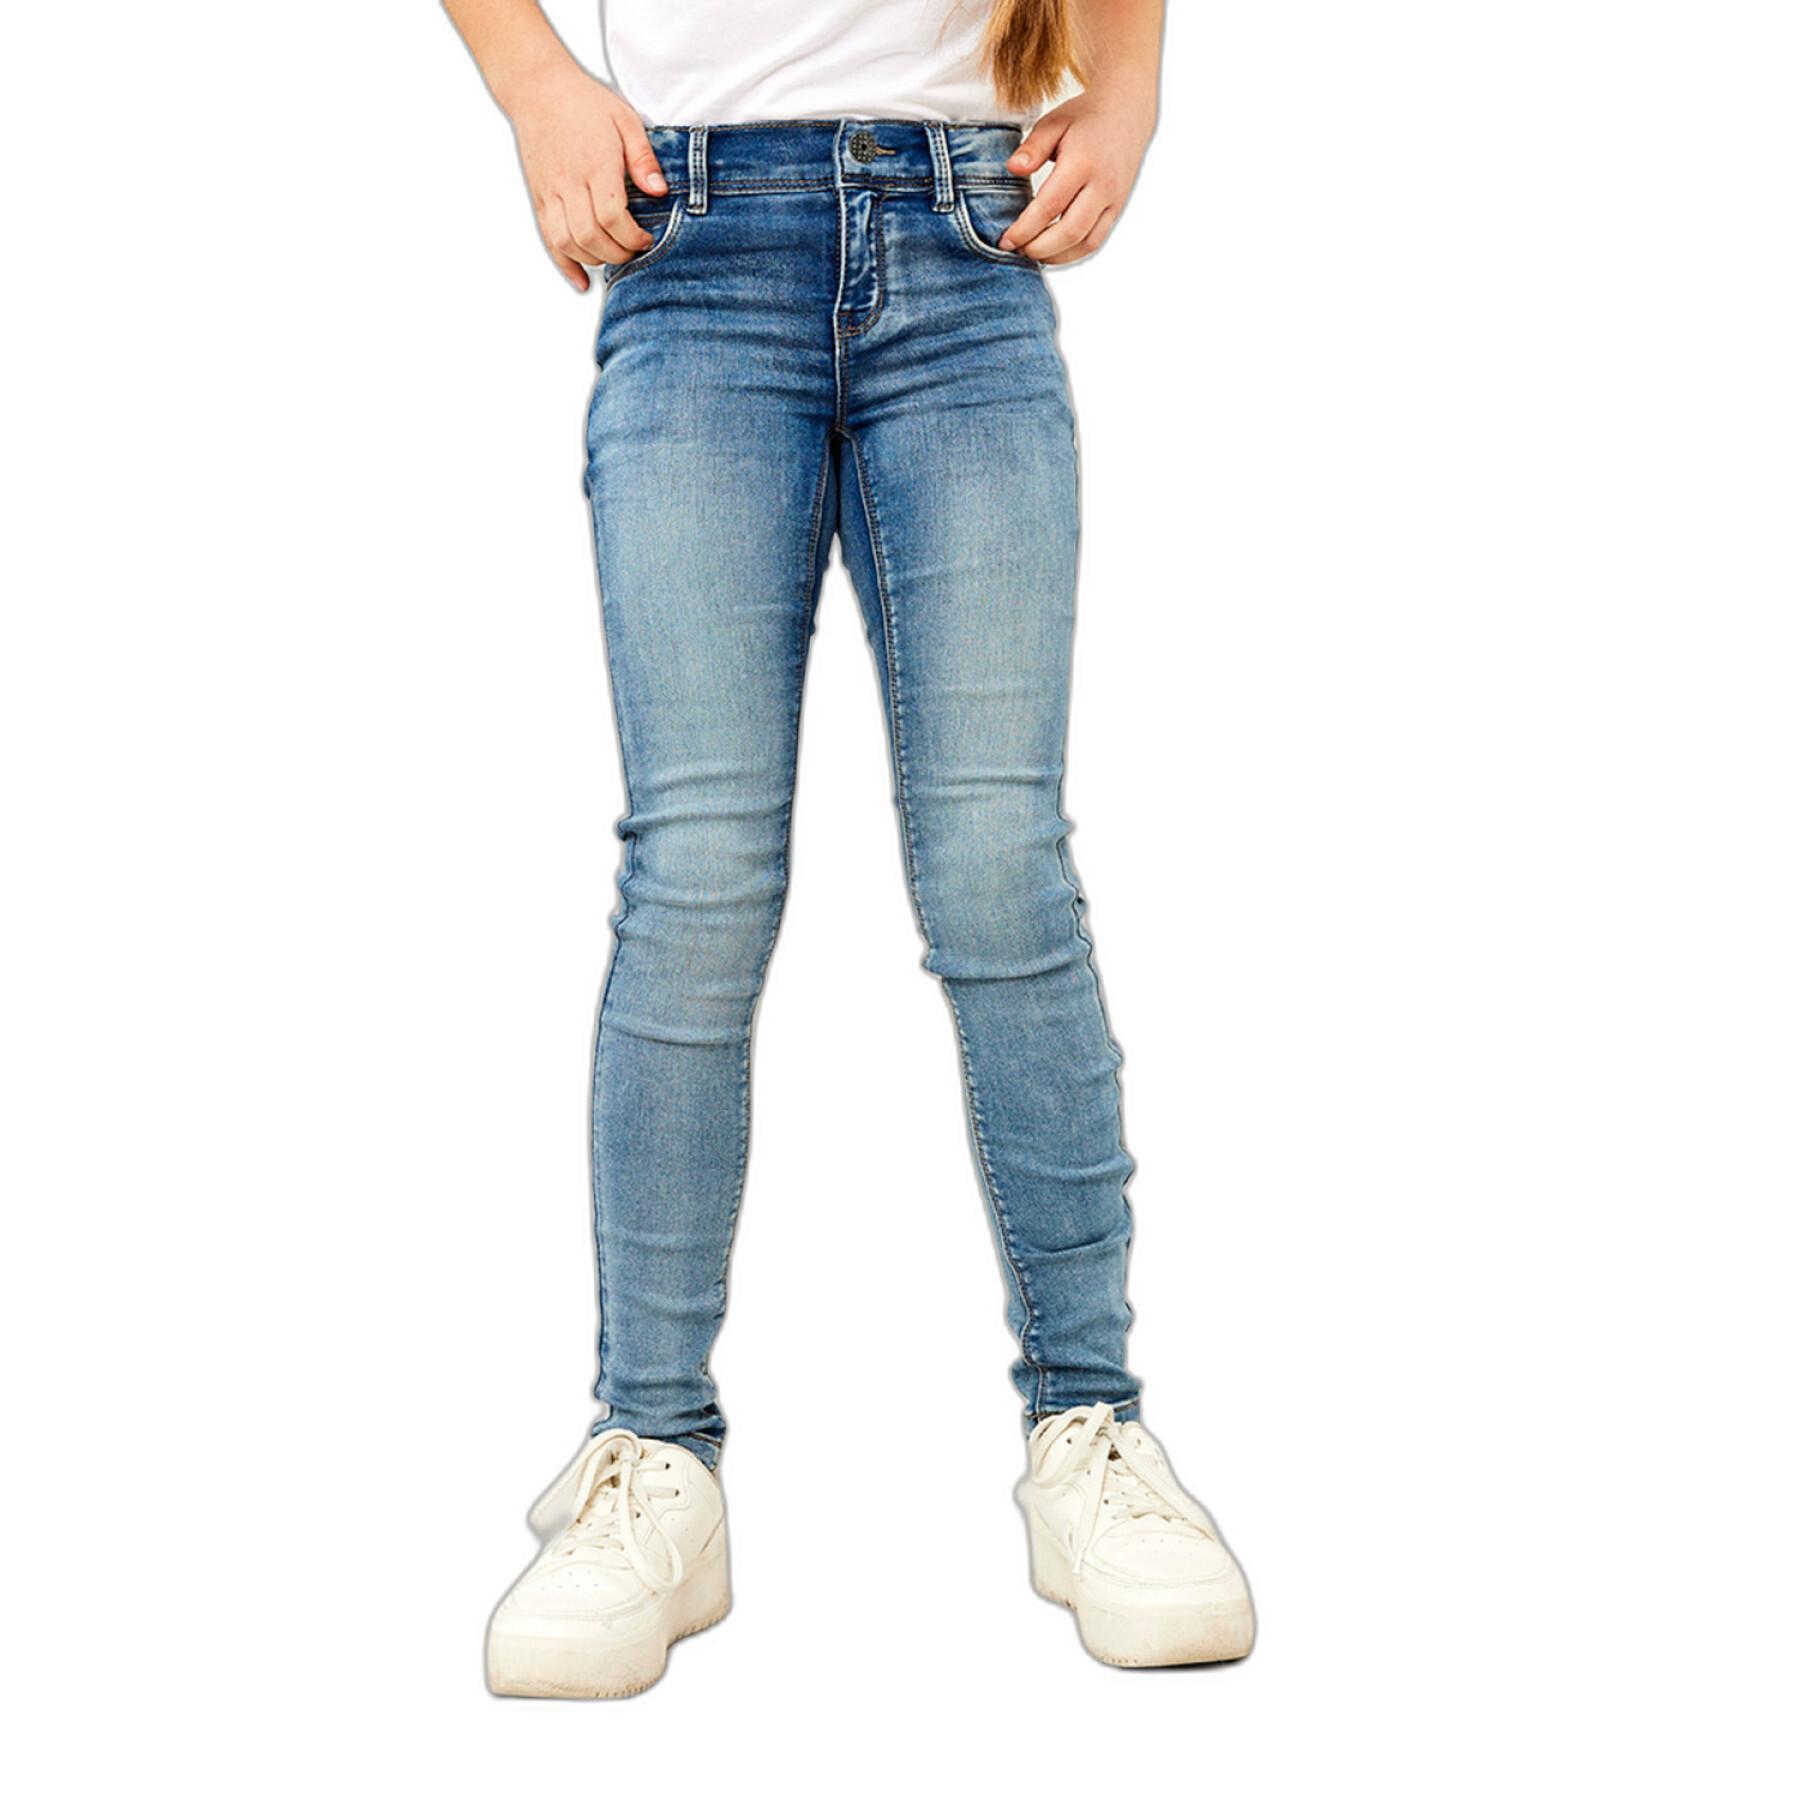 Skinny Jeans für Mädchen Name it Nkfpolly 1165-TH